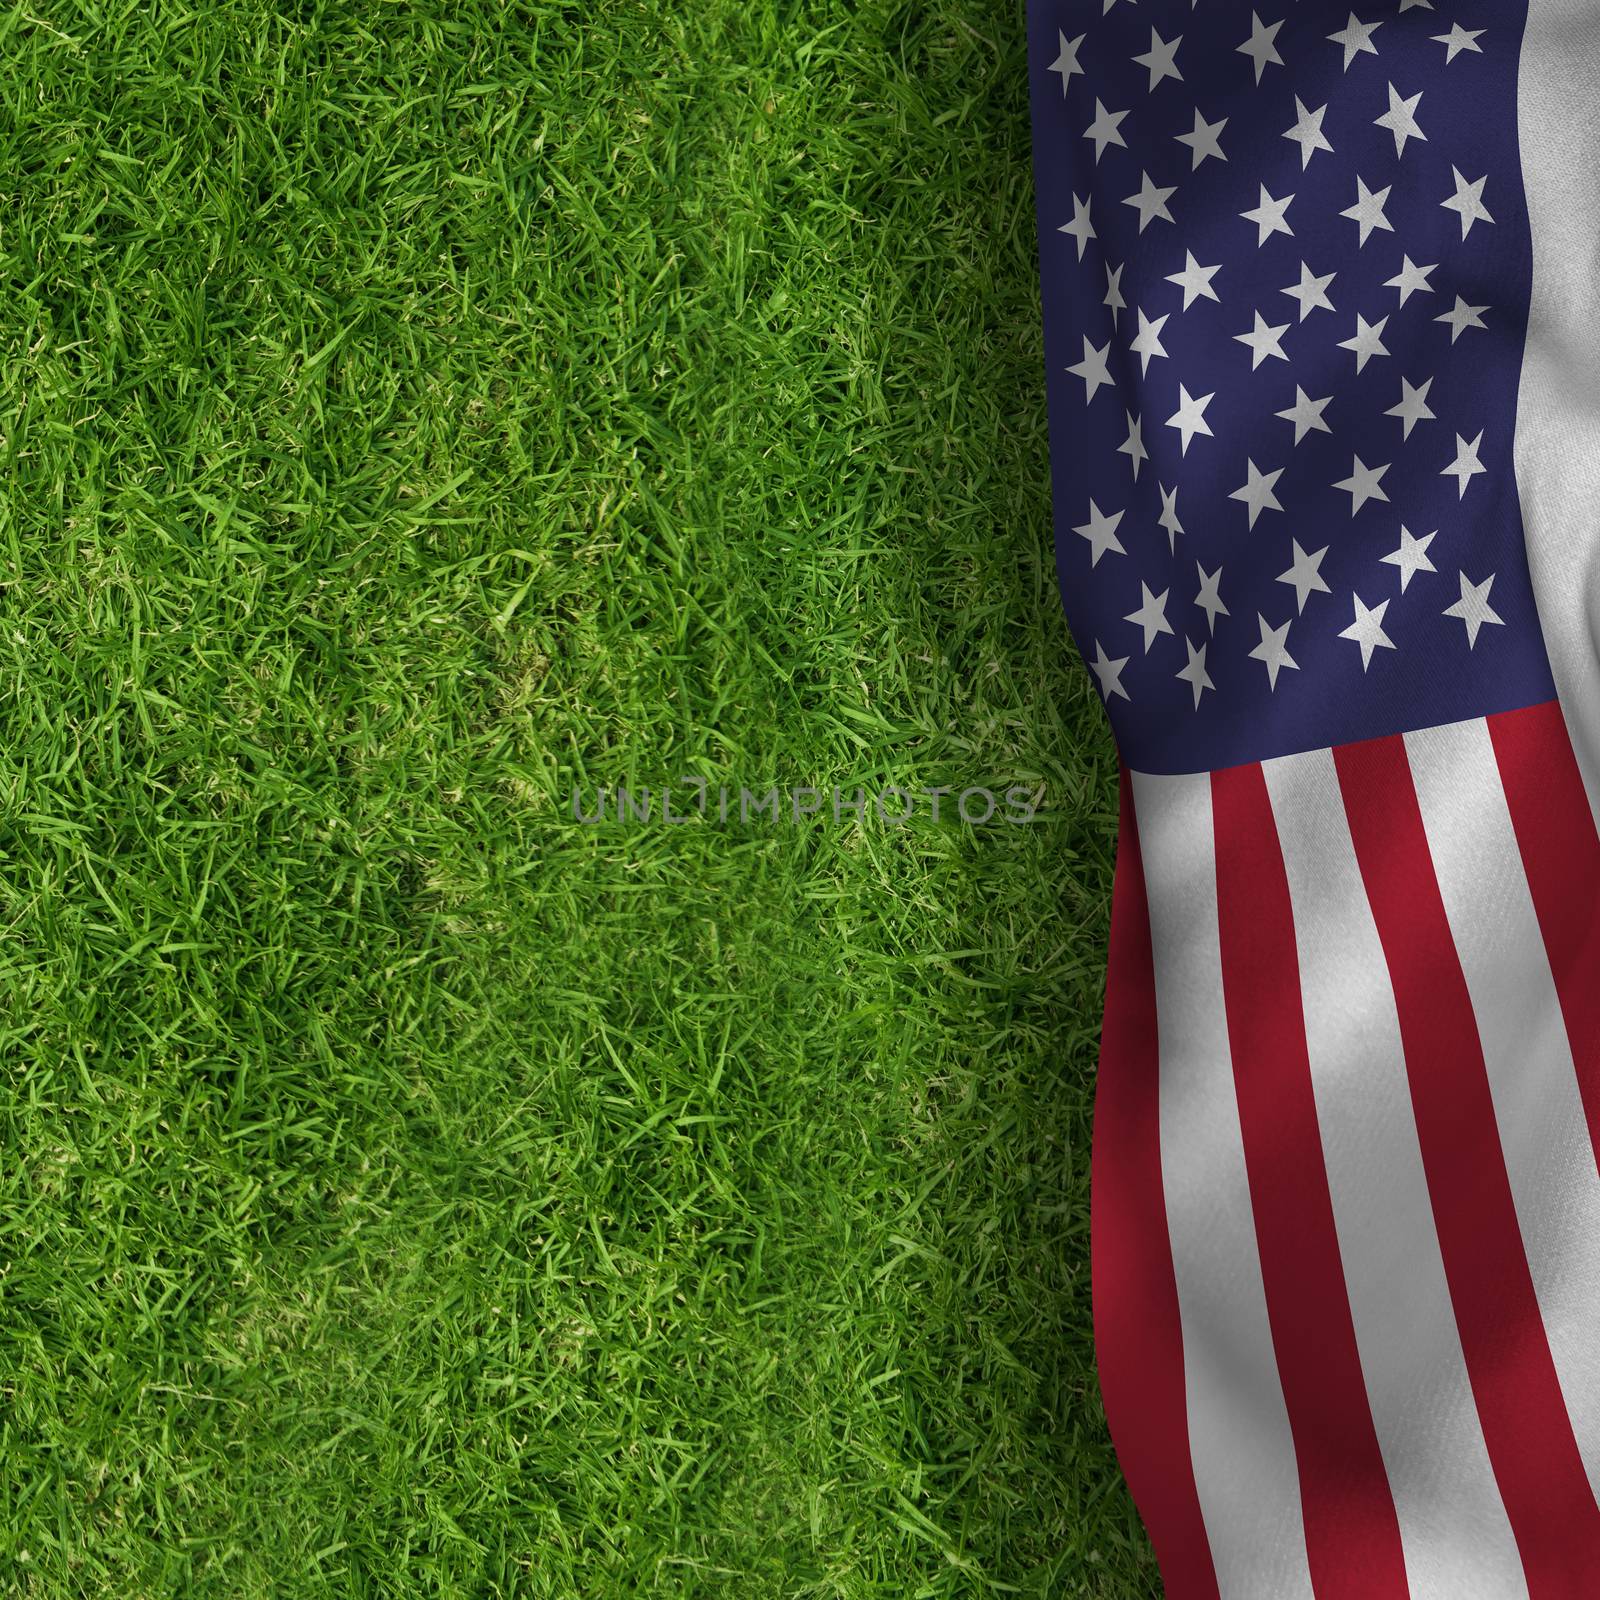 American flag against closed up view of grass